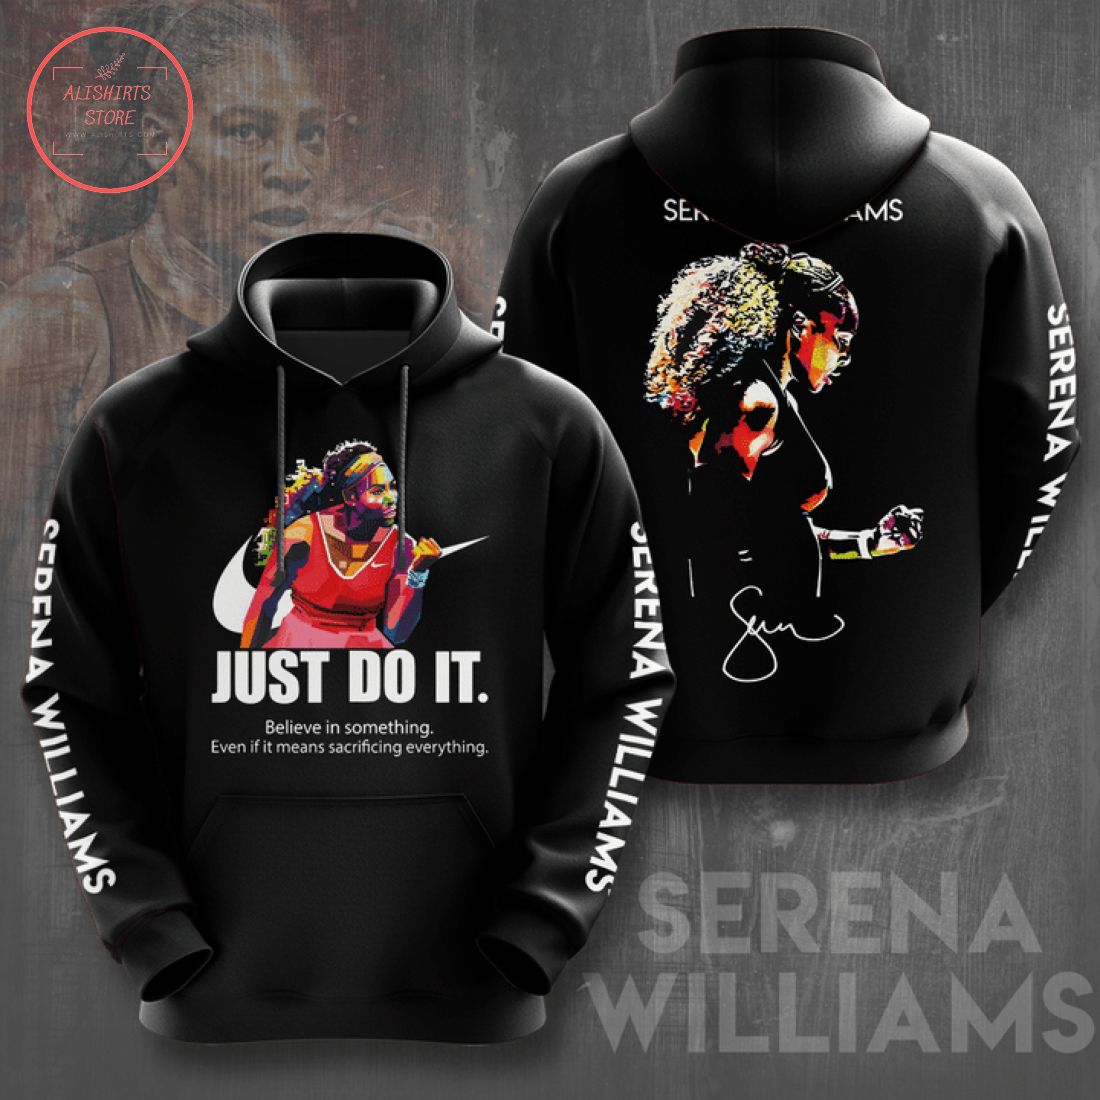 Serena Williams Just Do It All Over Printed Shirt